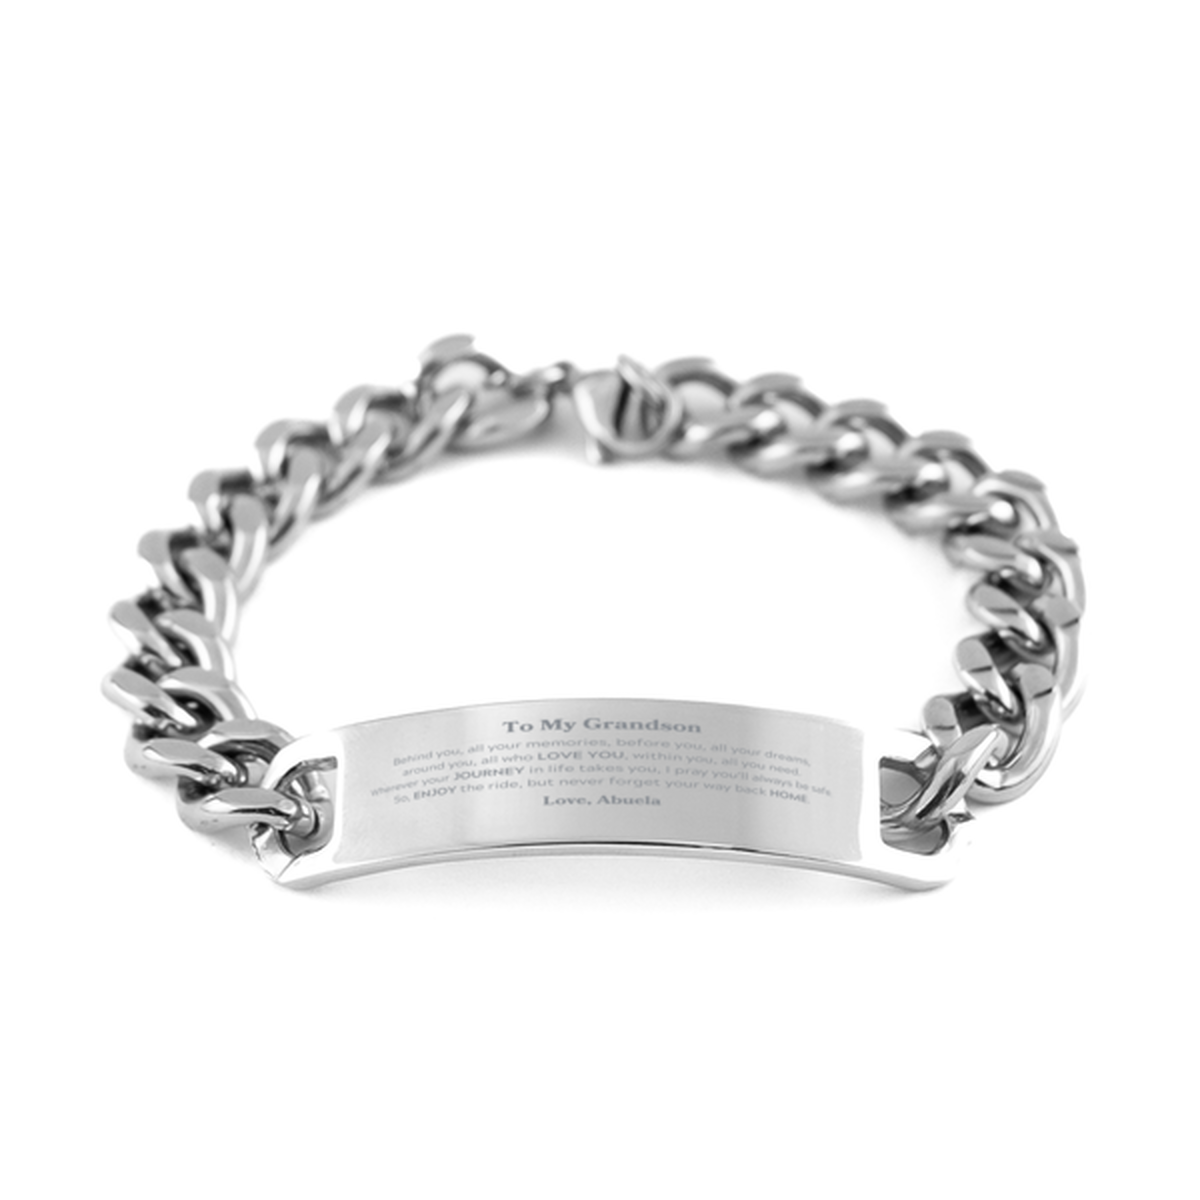 To My Grandson Graduation Gifts from Abuela, Grandson Cuban Chain Stainless Steel Bracelet Christmas Birthday Gifts for Grandson Behind you, all your memories, before you, all your dreams. Love, Abuela